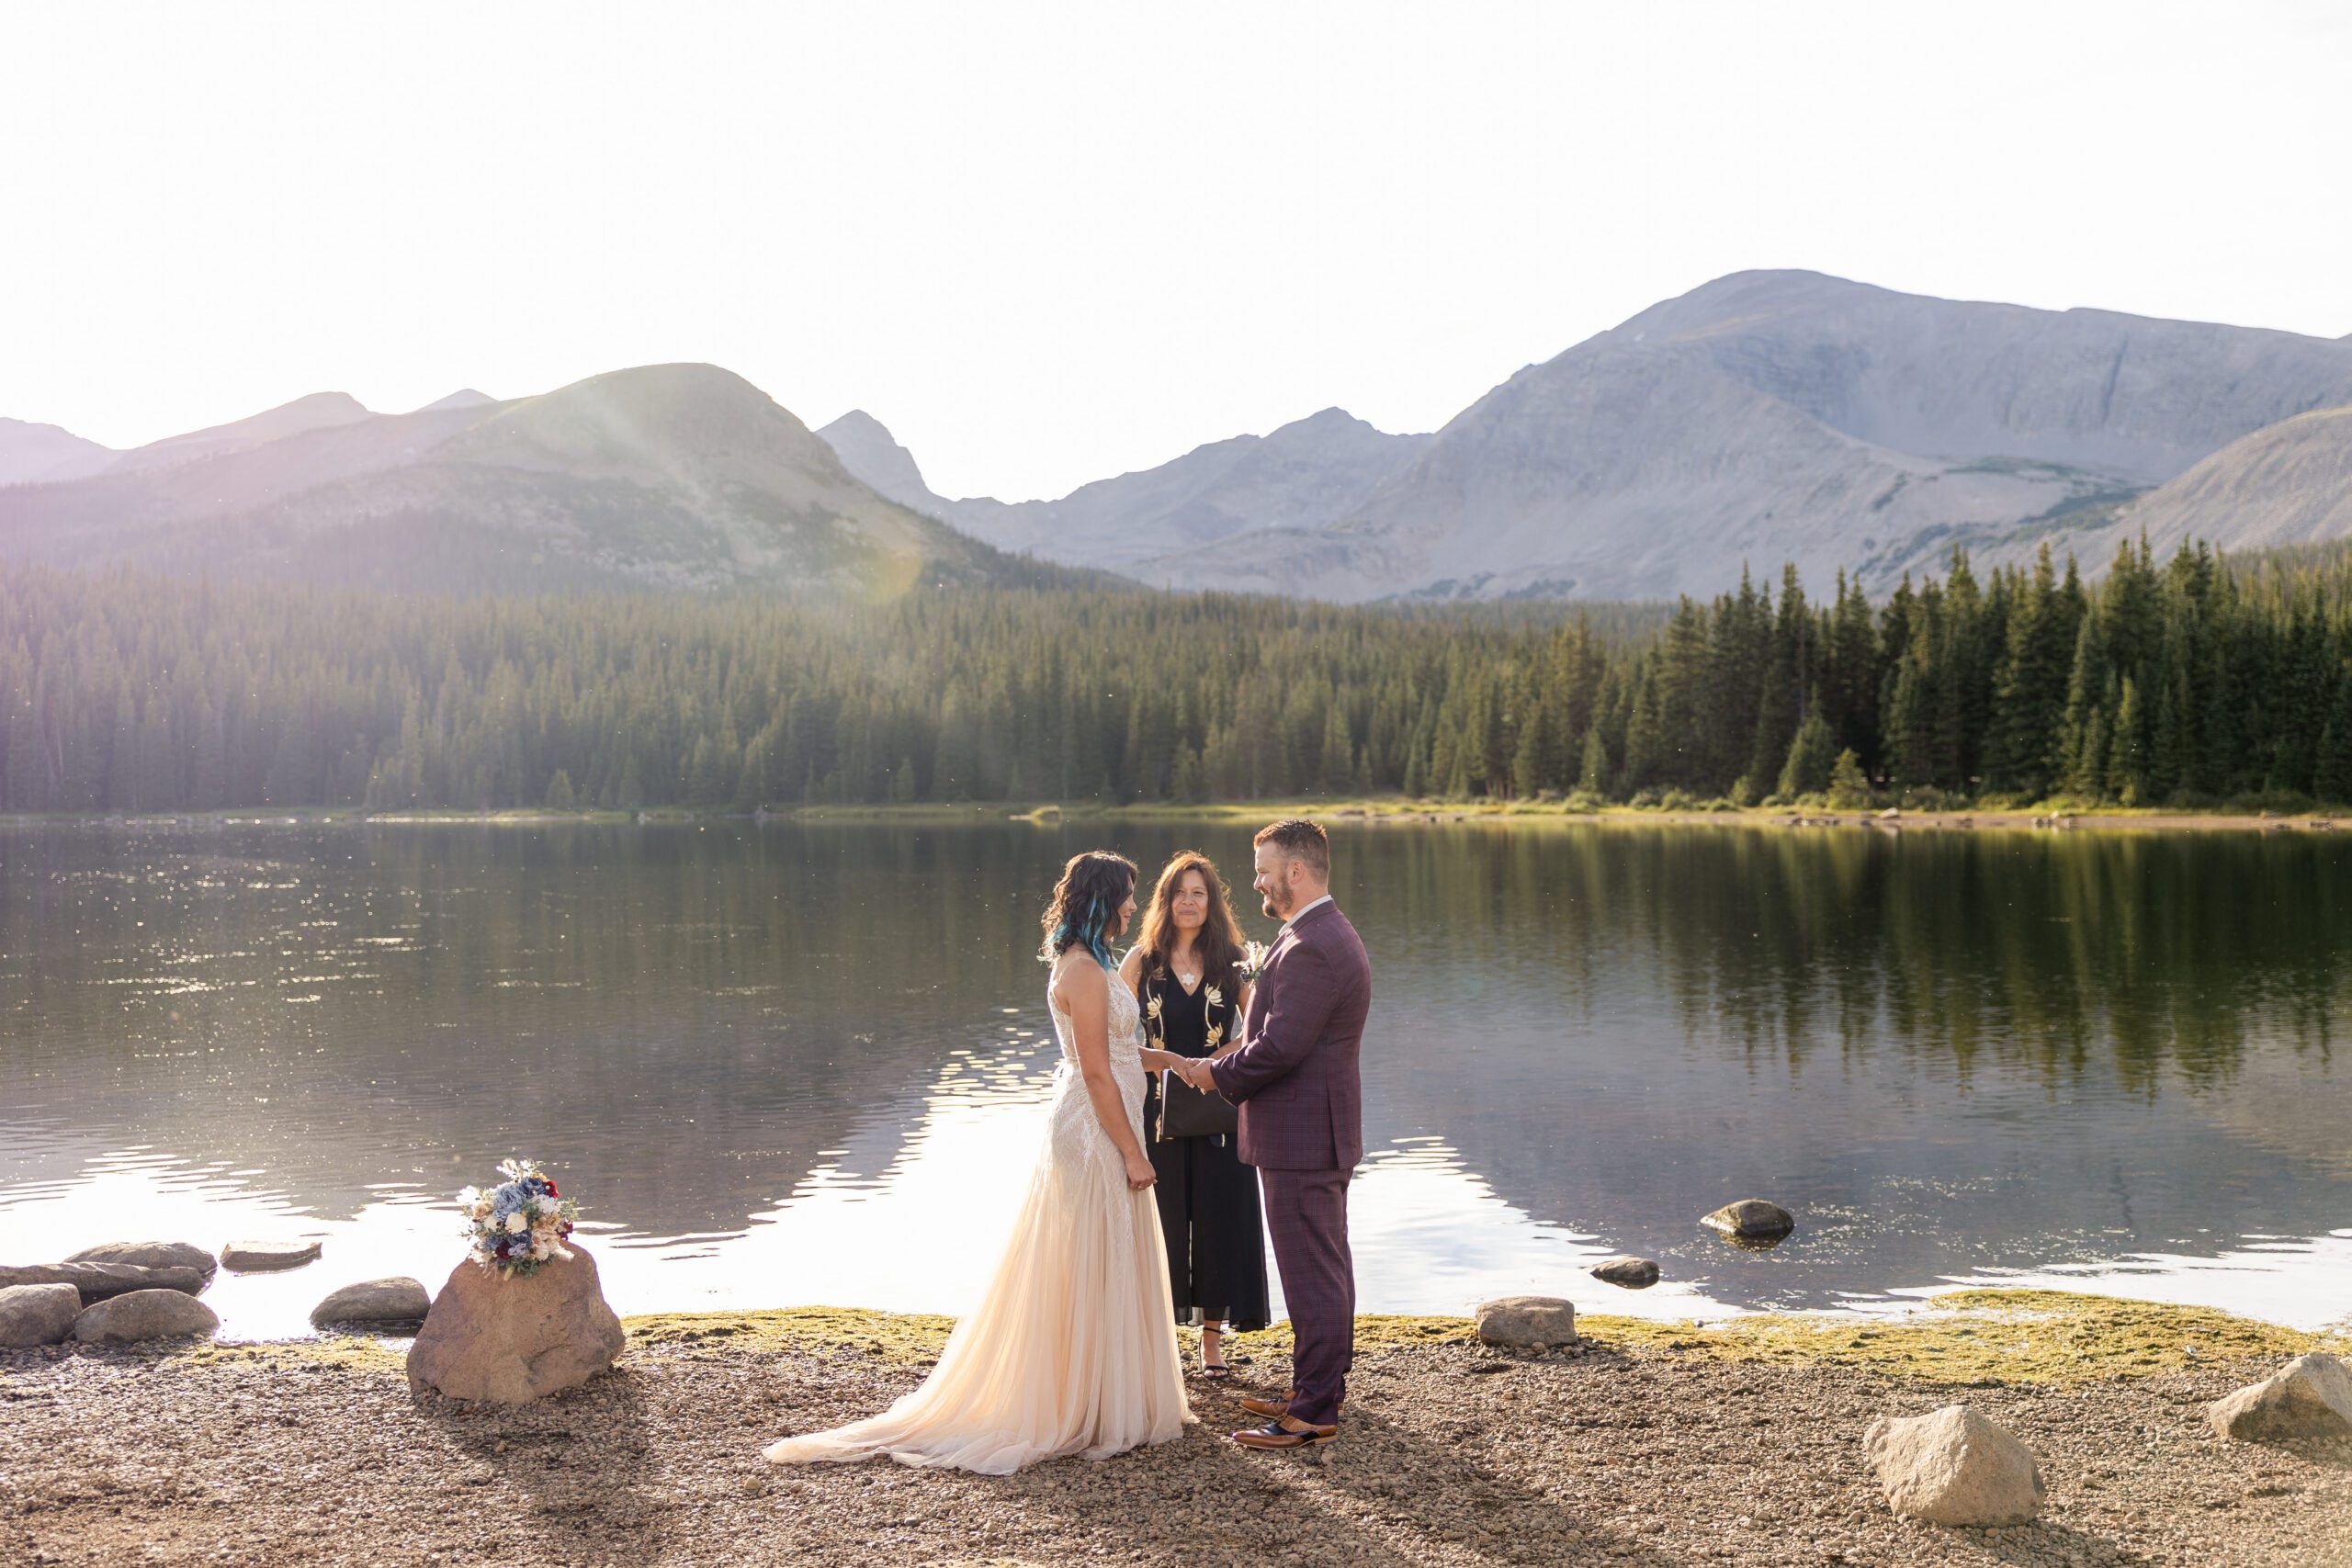 Groom placing the ring on his bride's finger at their Brainard Lake Elopement.